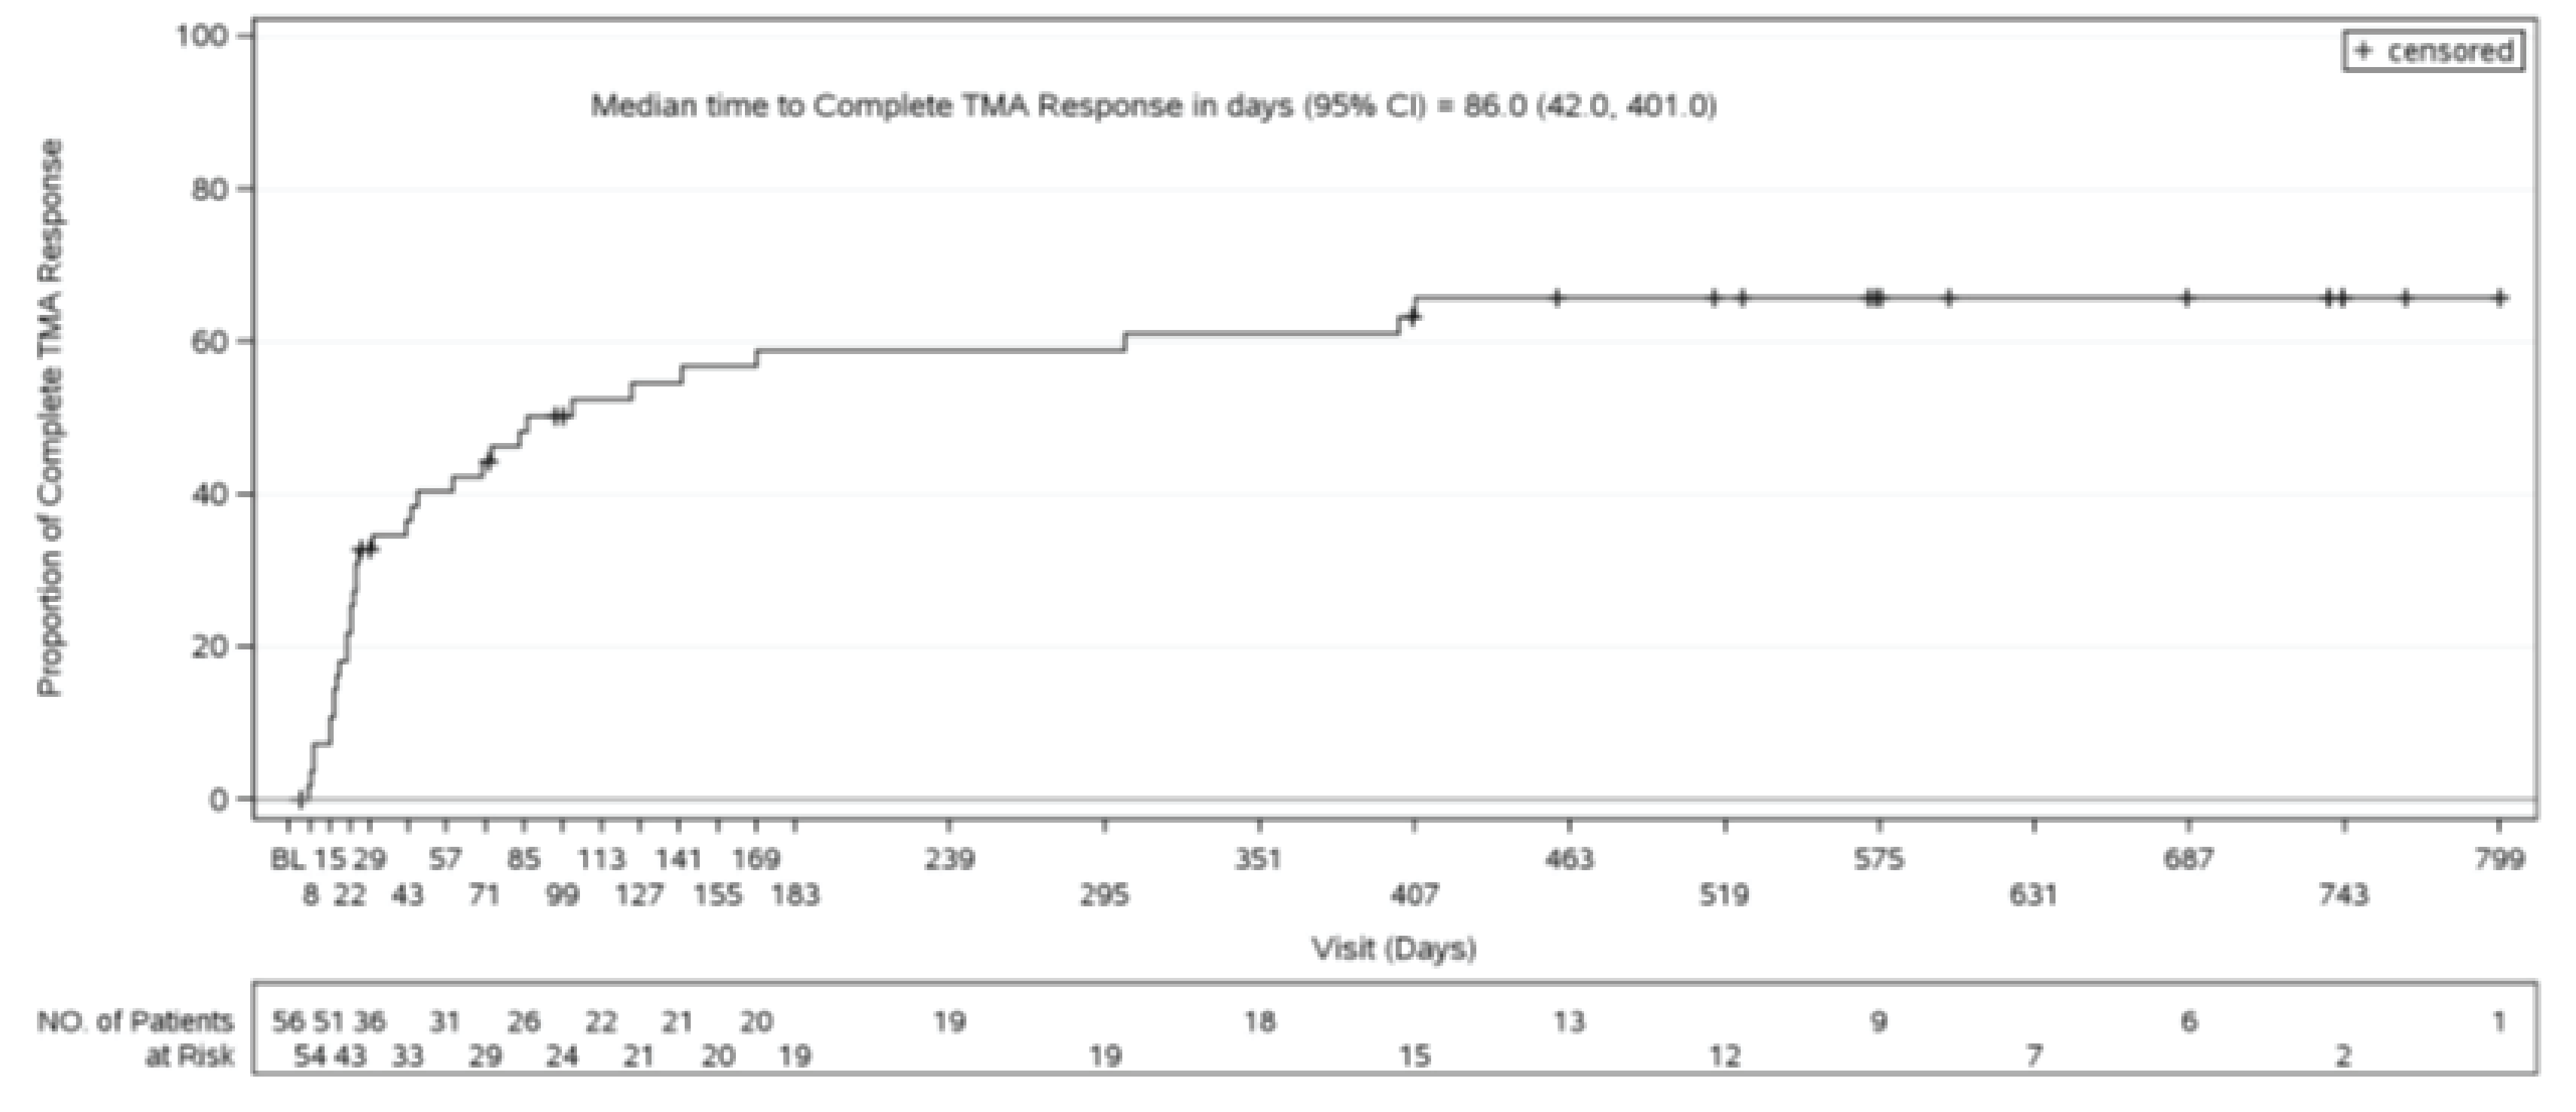 The median time to complete thrombotic microangiopathy response was 86 days and occurred as early as 7 days following the first dose of ravulizumab. The latest time to complete thrombotic microangiopathy response was observed at 401 days.